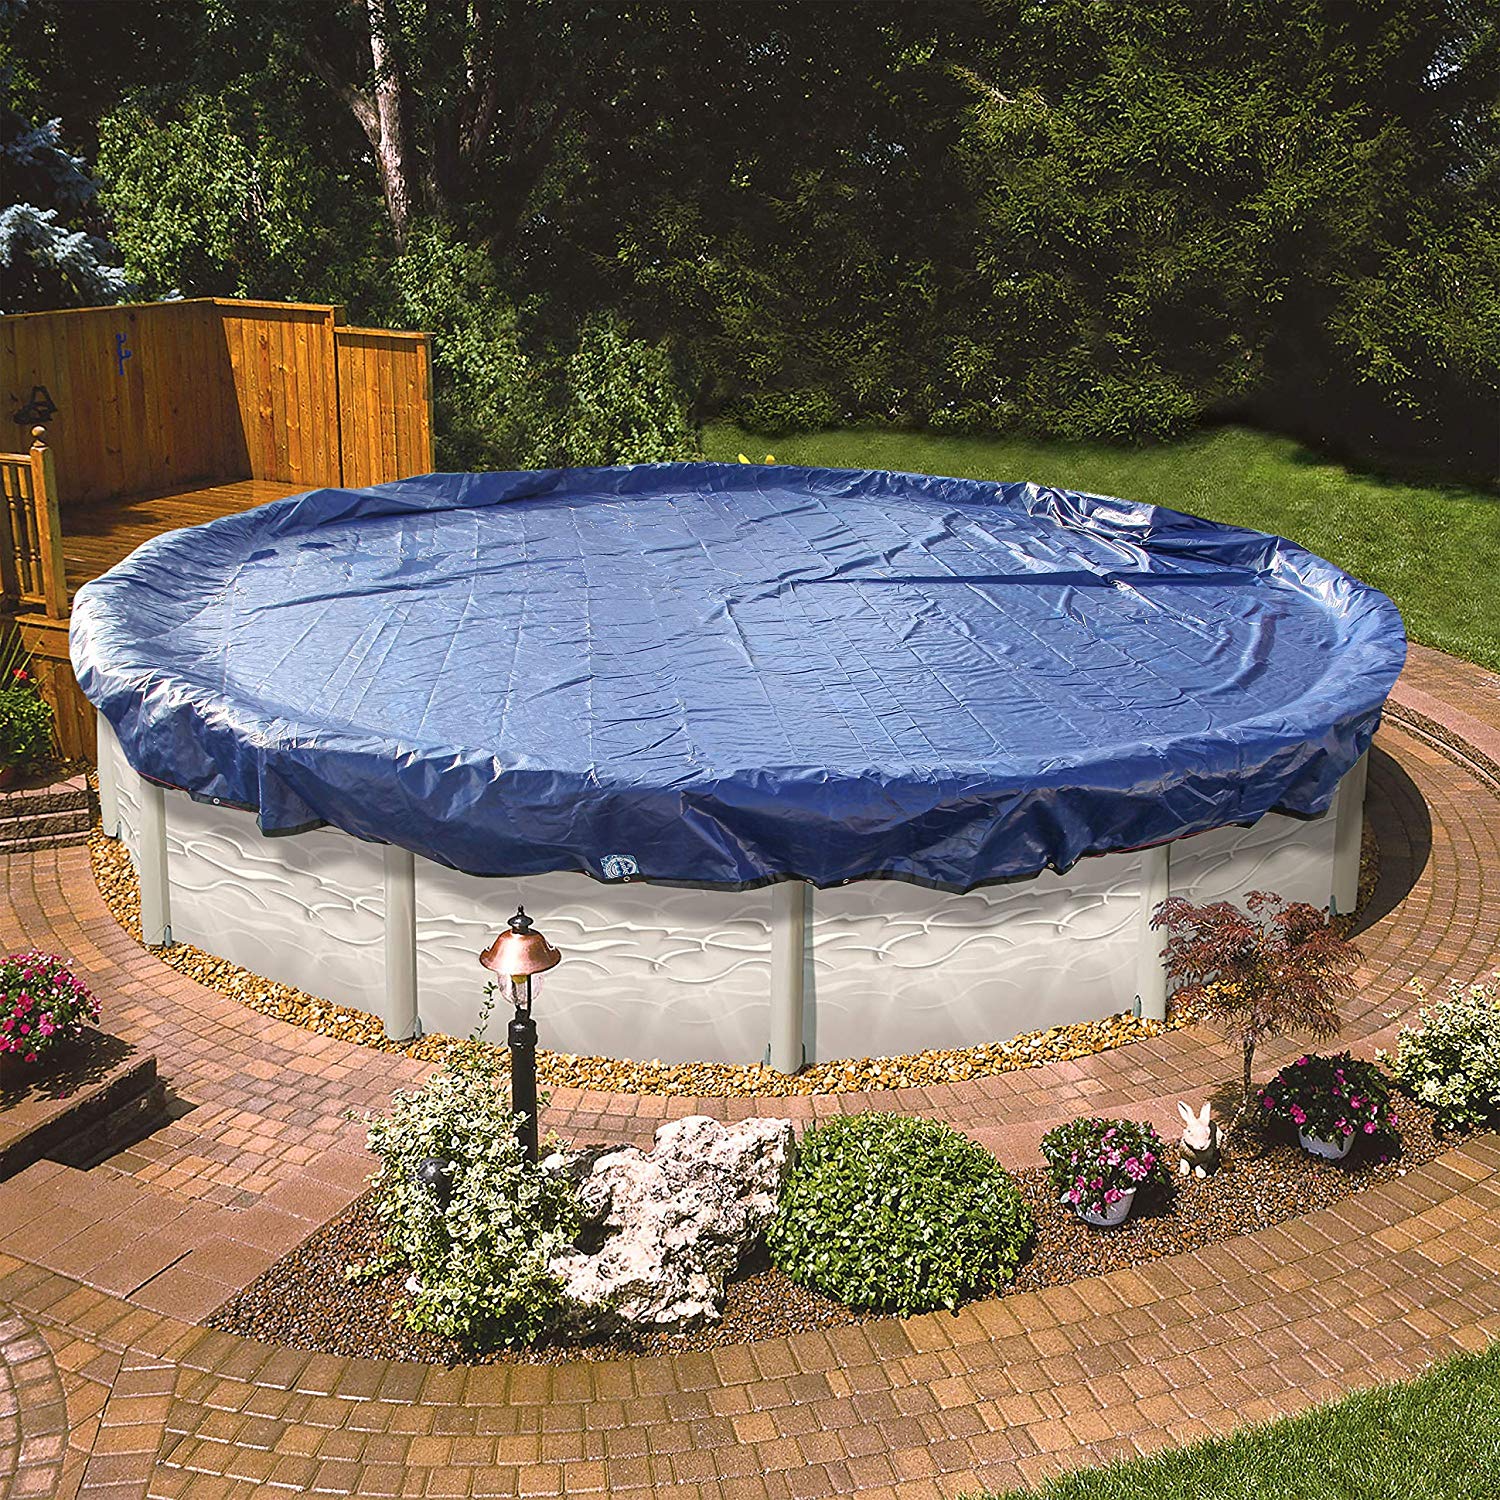 How to Closing Inground Pool Without Draining Water 